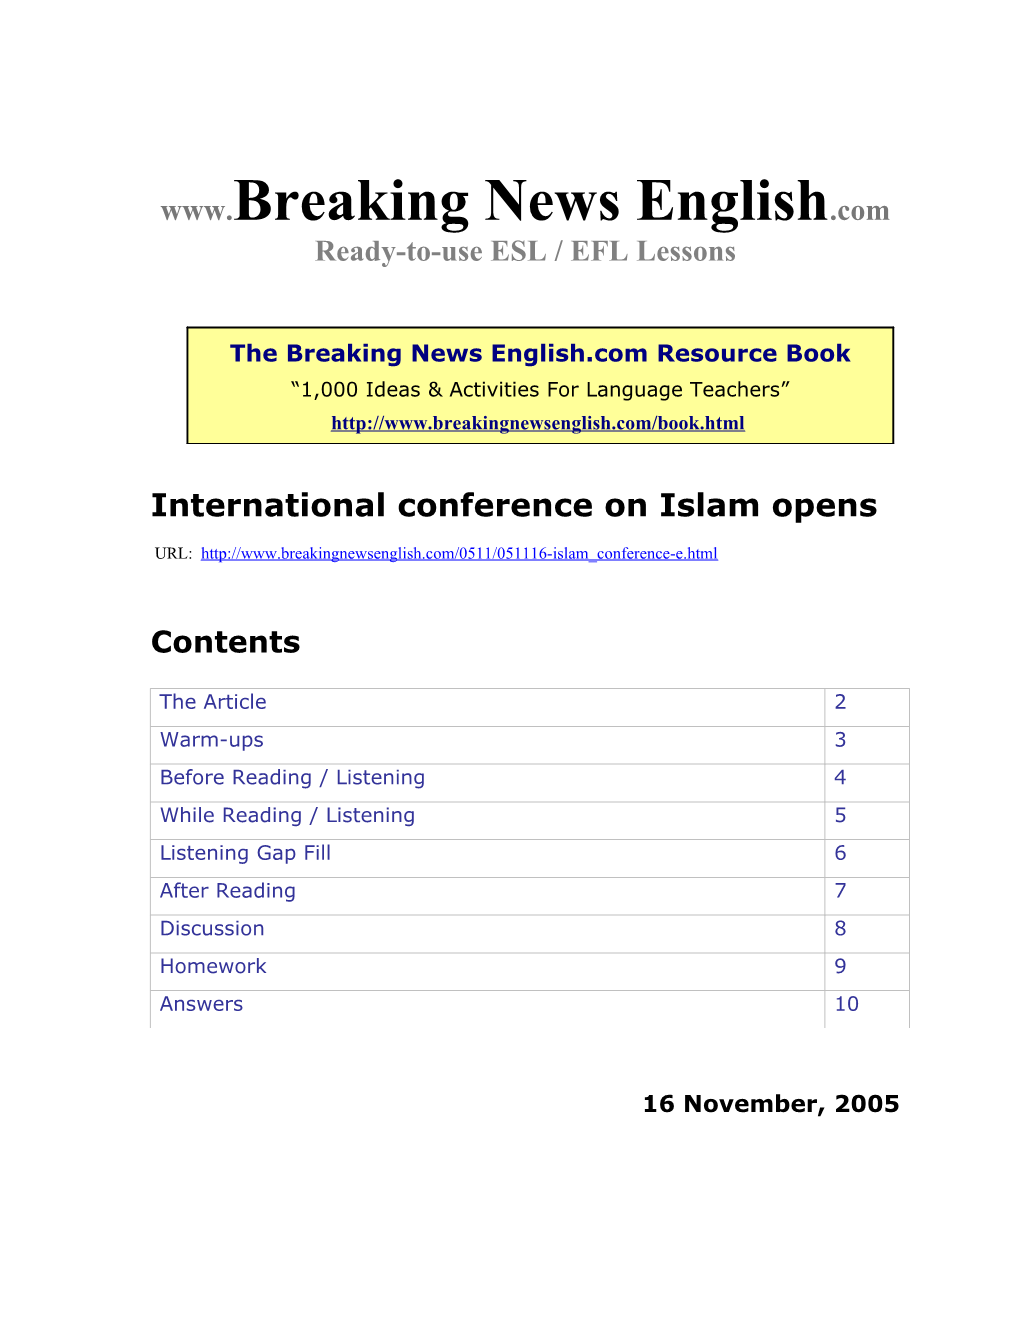 International Conference on Islam Opens